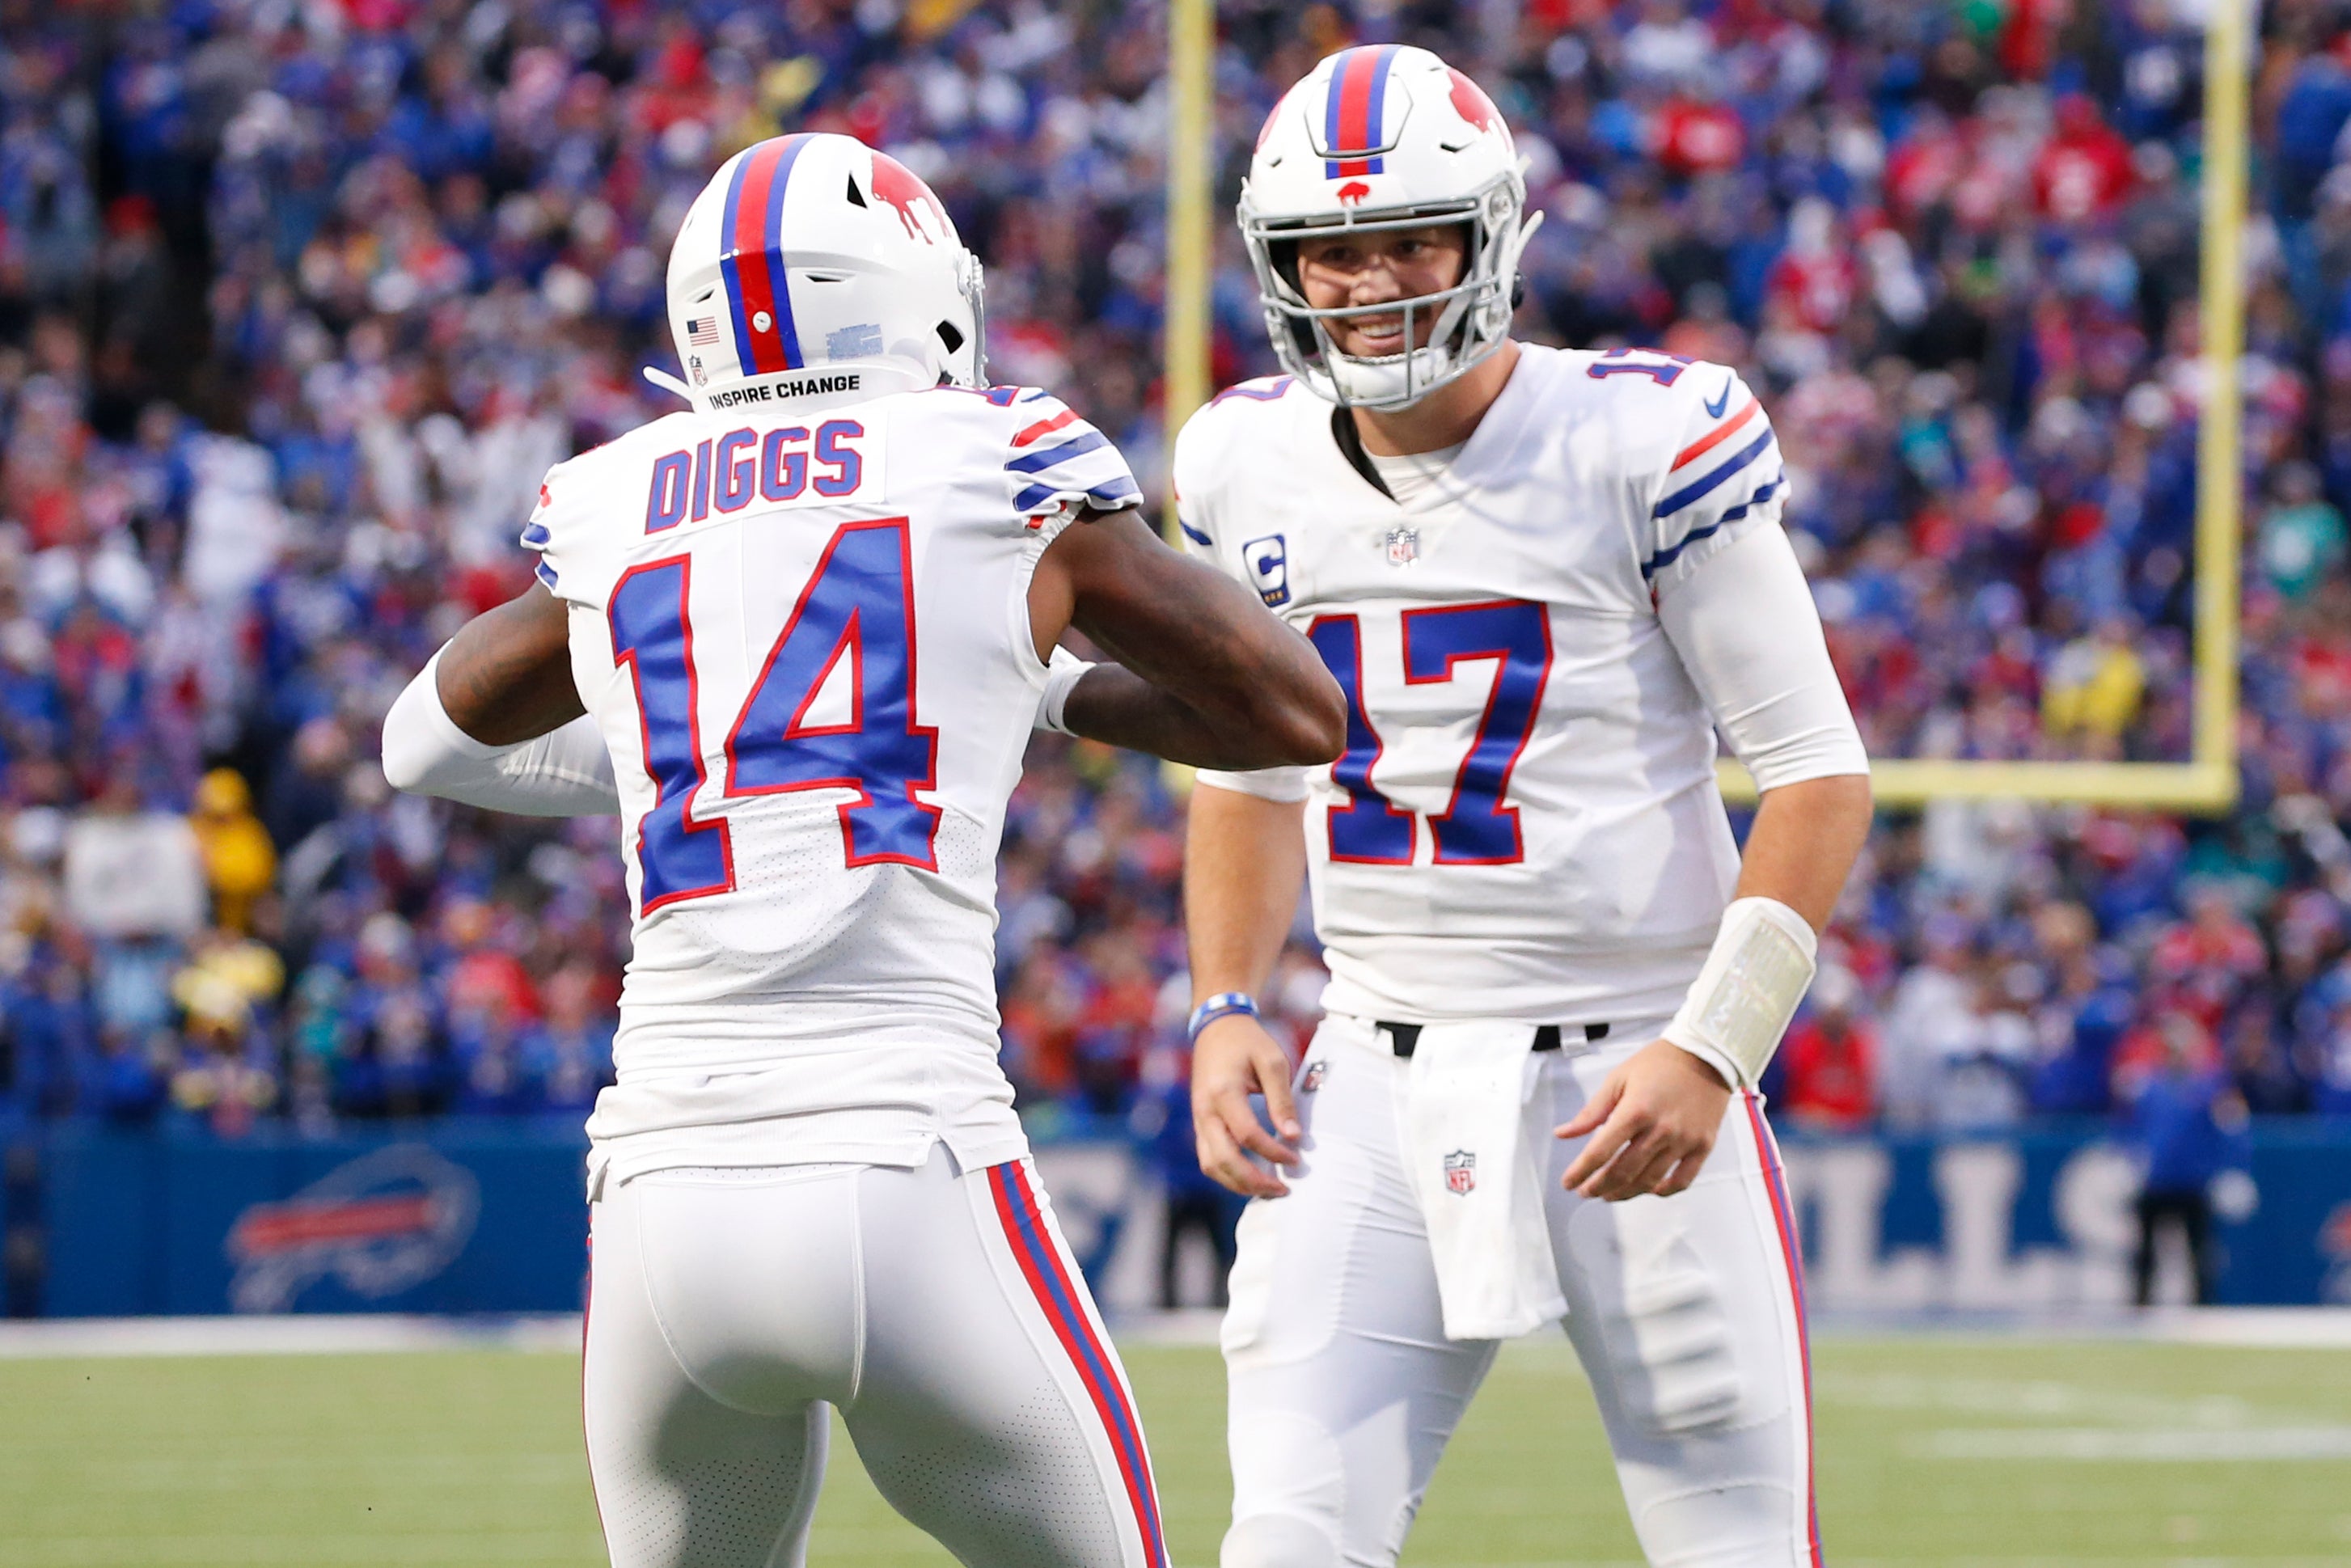 Buffalo Bills defeat Miami Dolphins to retain control of AFC East division